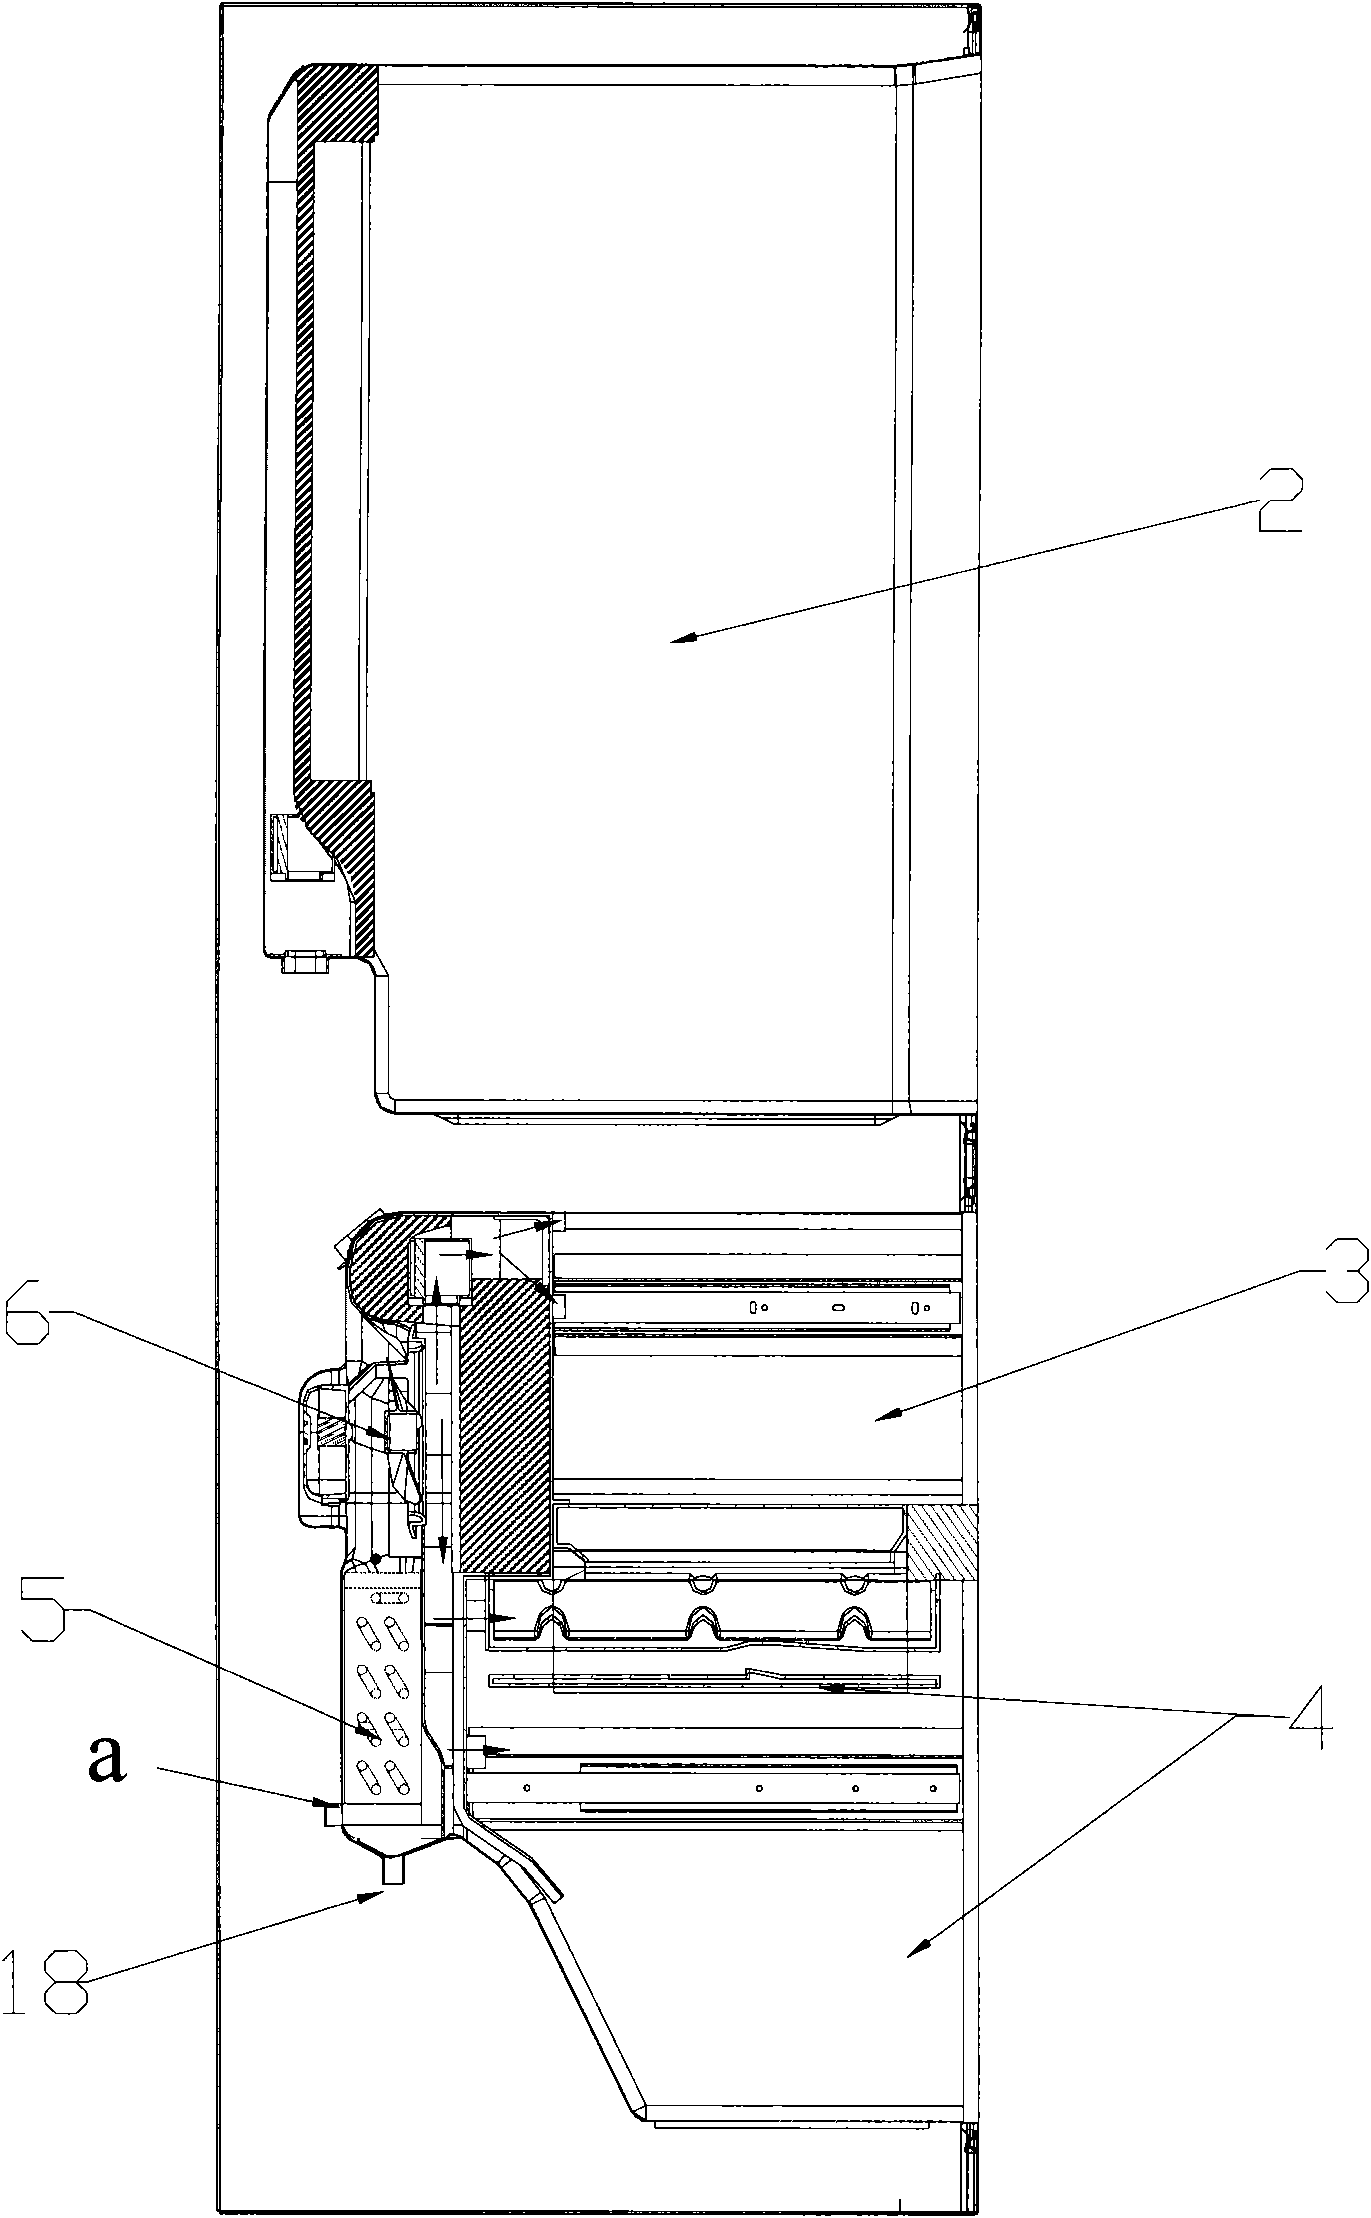 Condensed water collecting device